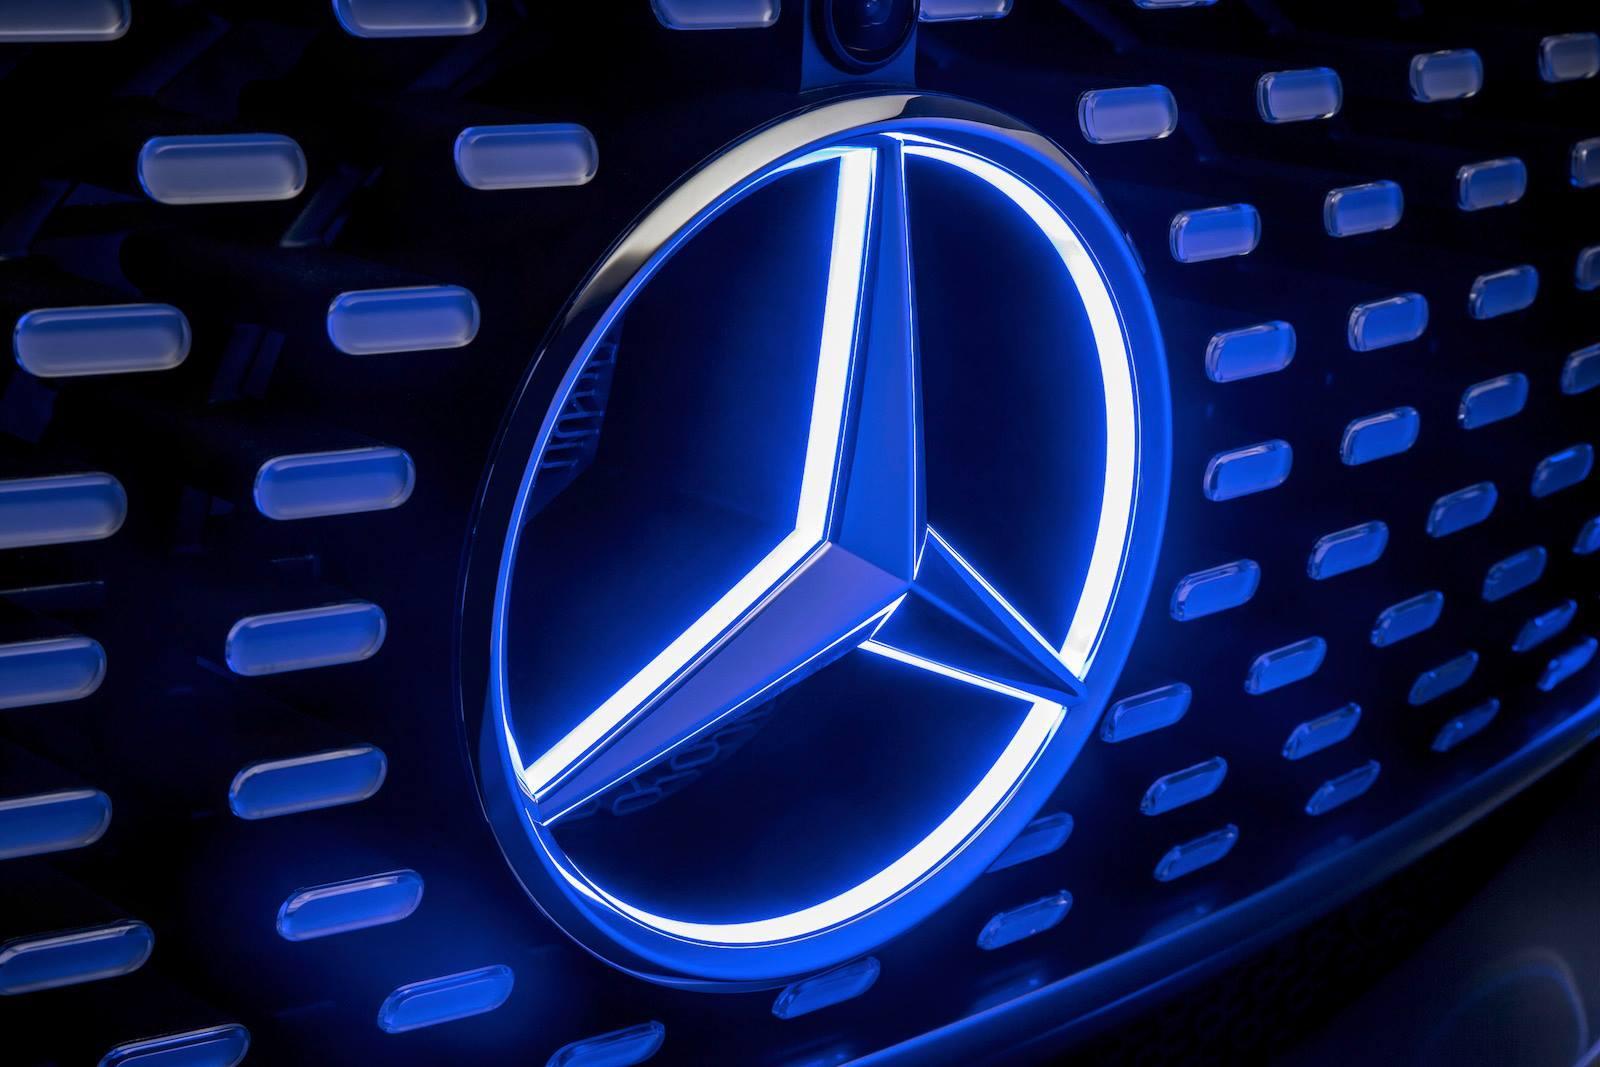 Blue Mercedes Logo - More Teasers Released For Mercedes Concept Debuting At 2015 CES